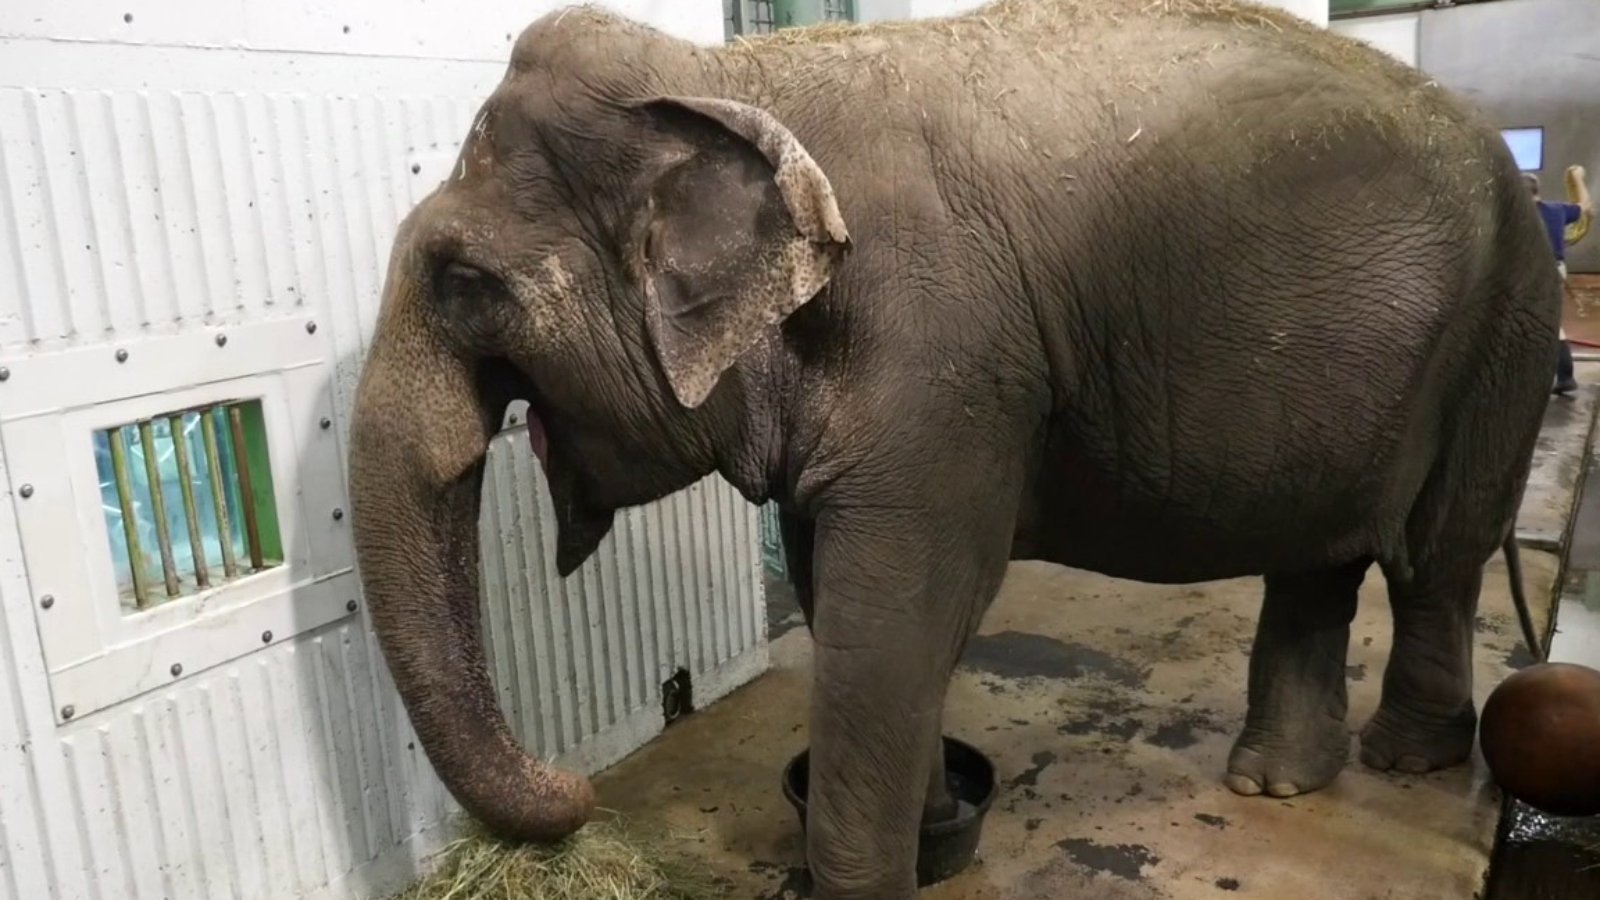 lucy the elephant in a zoo behind bars